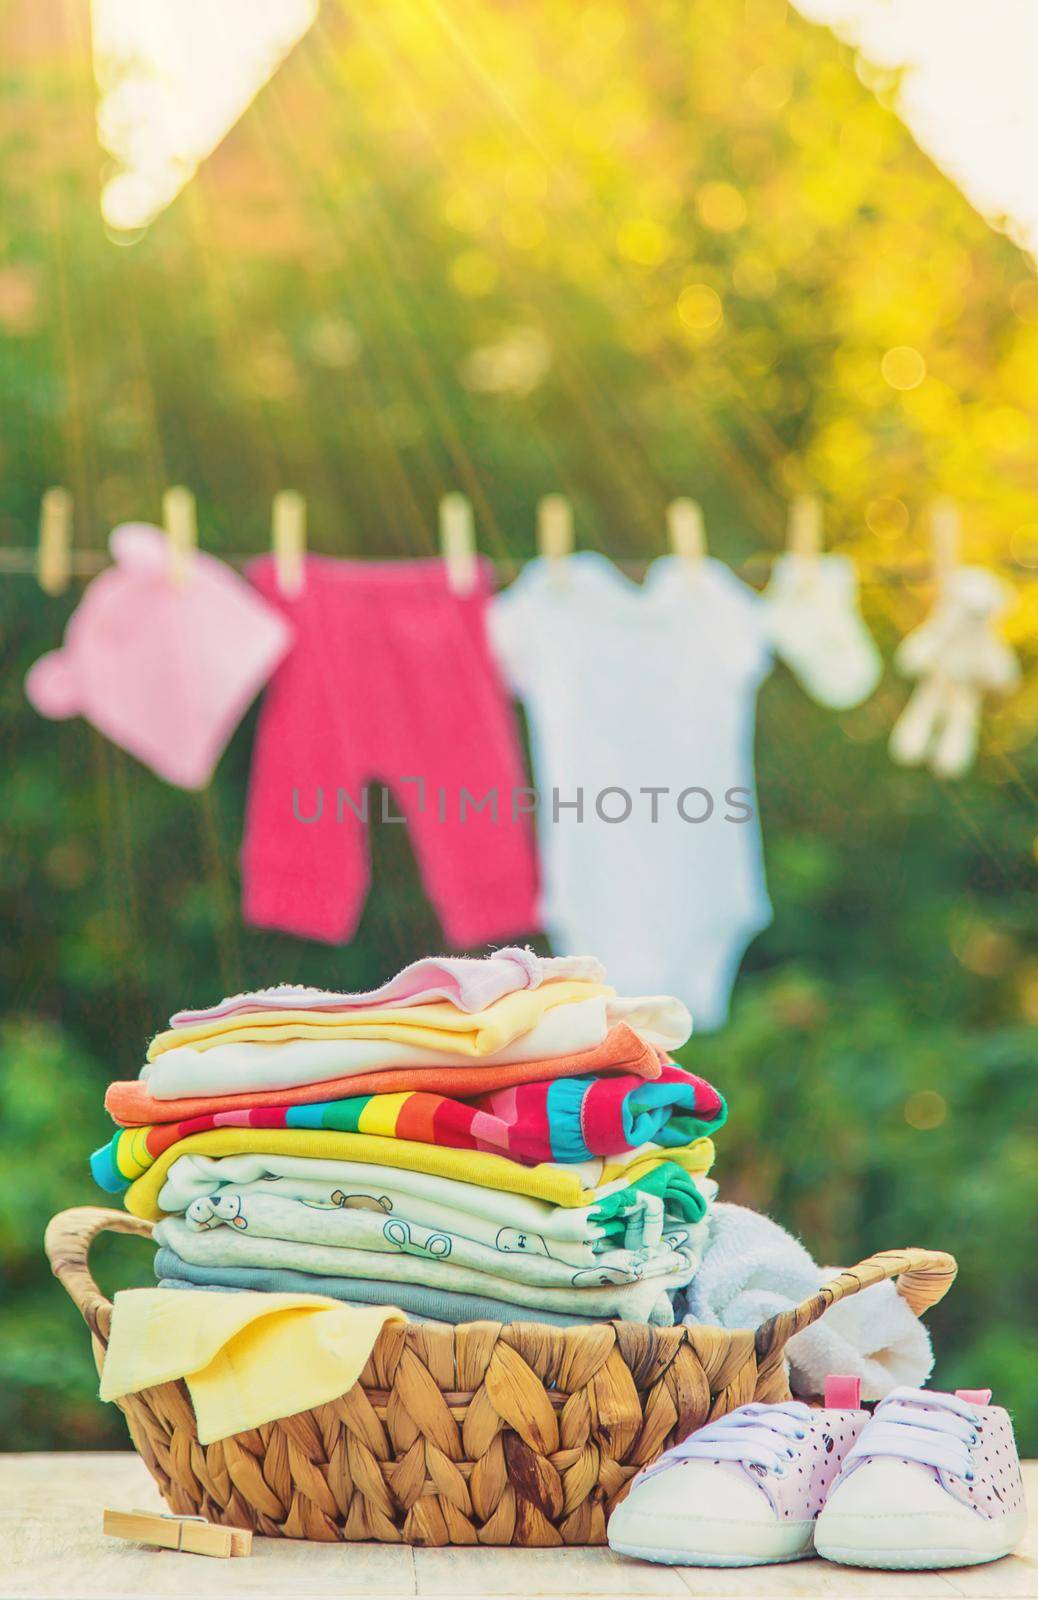 washing baby clothes. Linen dries in the fresh air. Selective focus. nature.